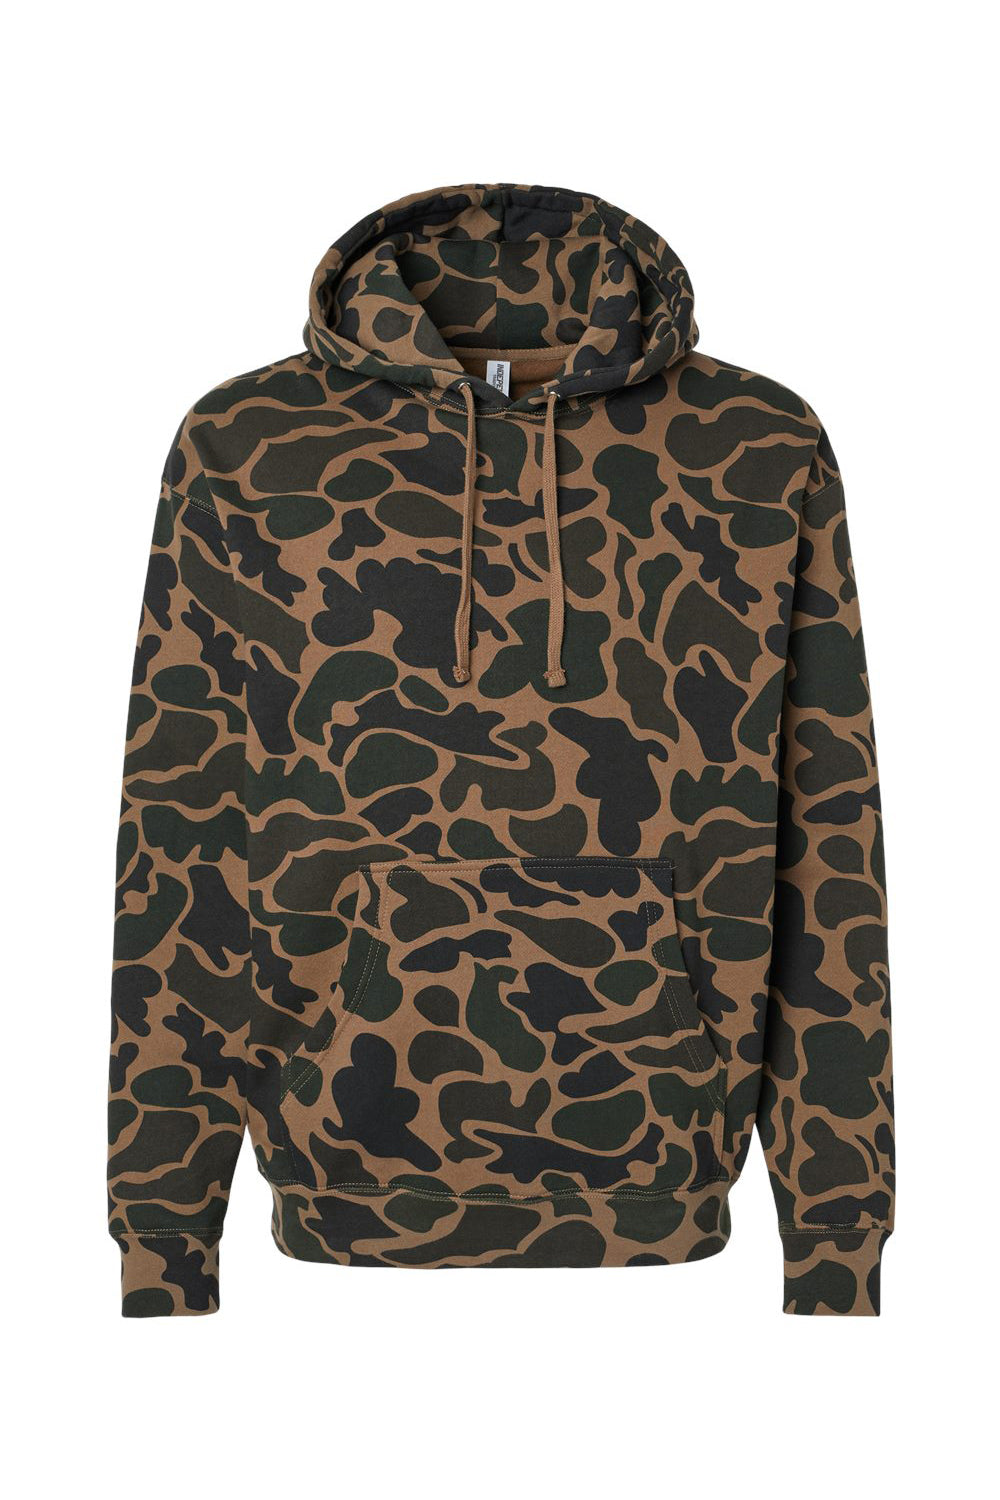 Independent Trading Co. IND4000 Mens Hooded Sweatshirt Hoodie Duck Camo Flat Front